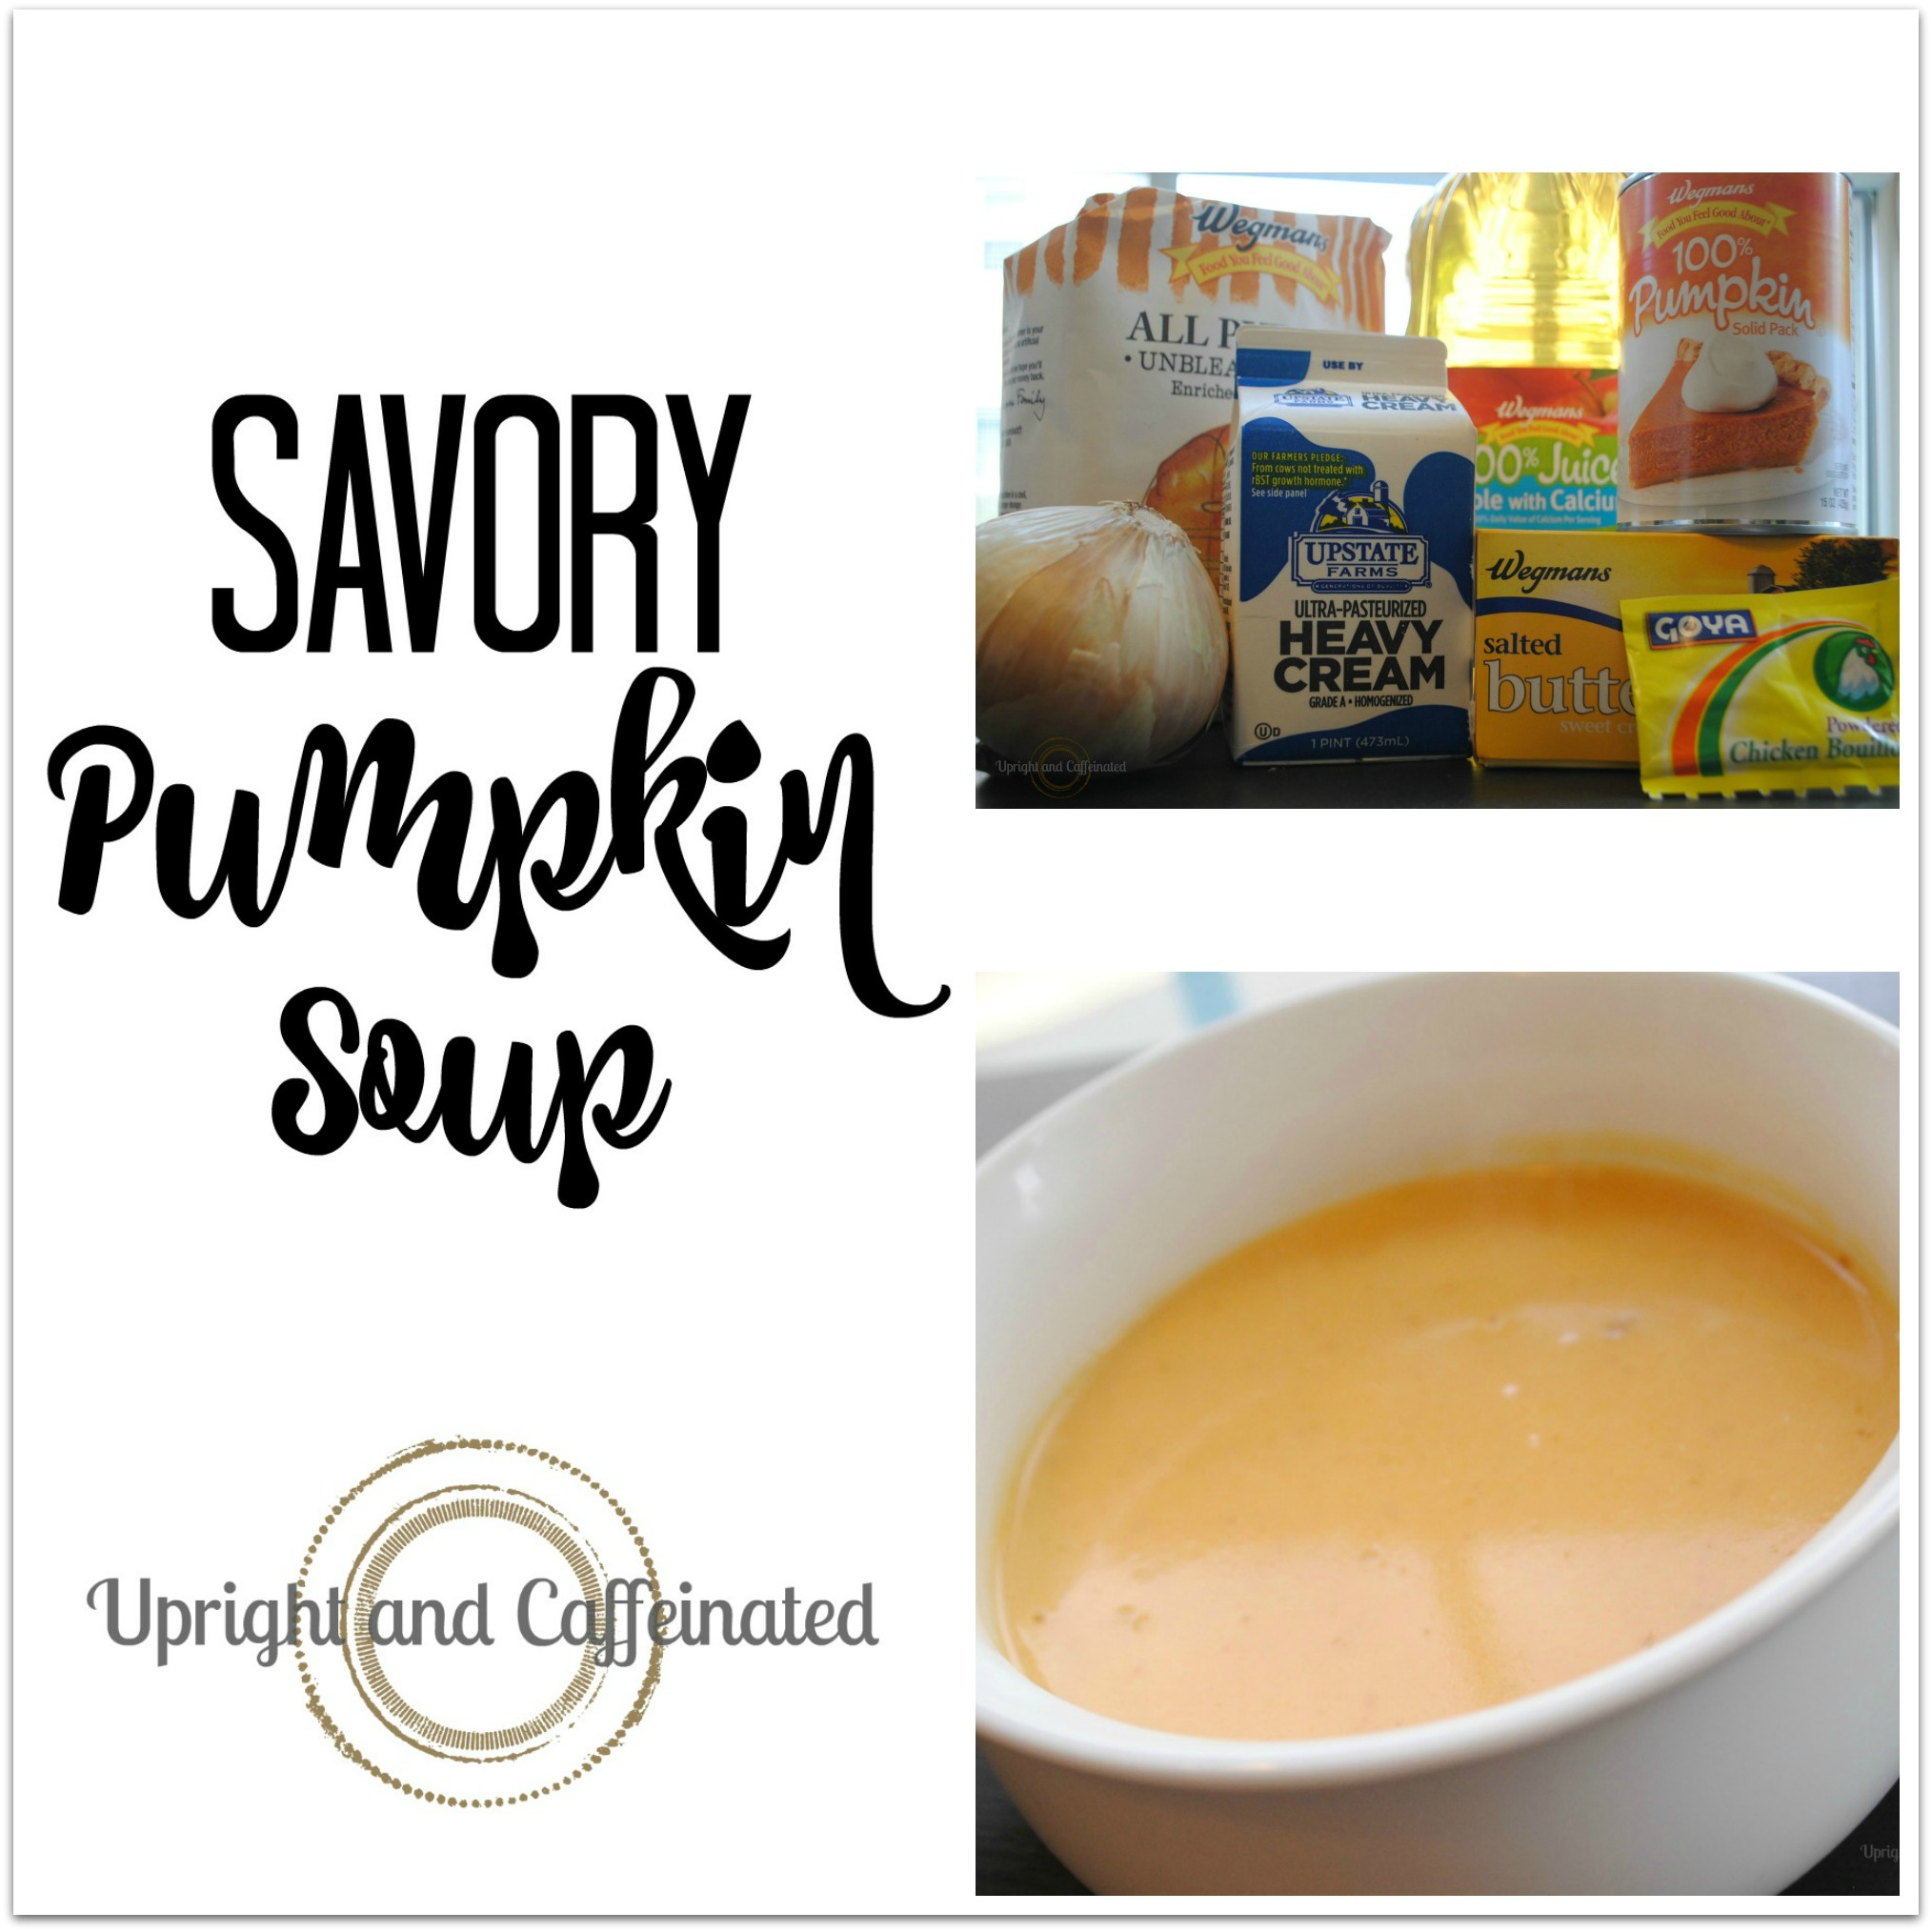 Savor Pumpkin Soup Recipe from Upright and Caffeinated